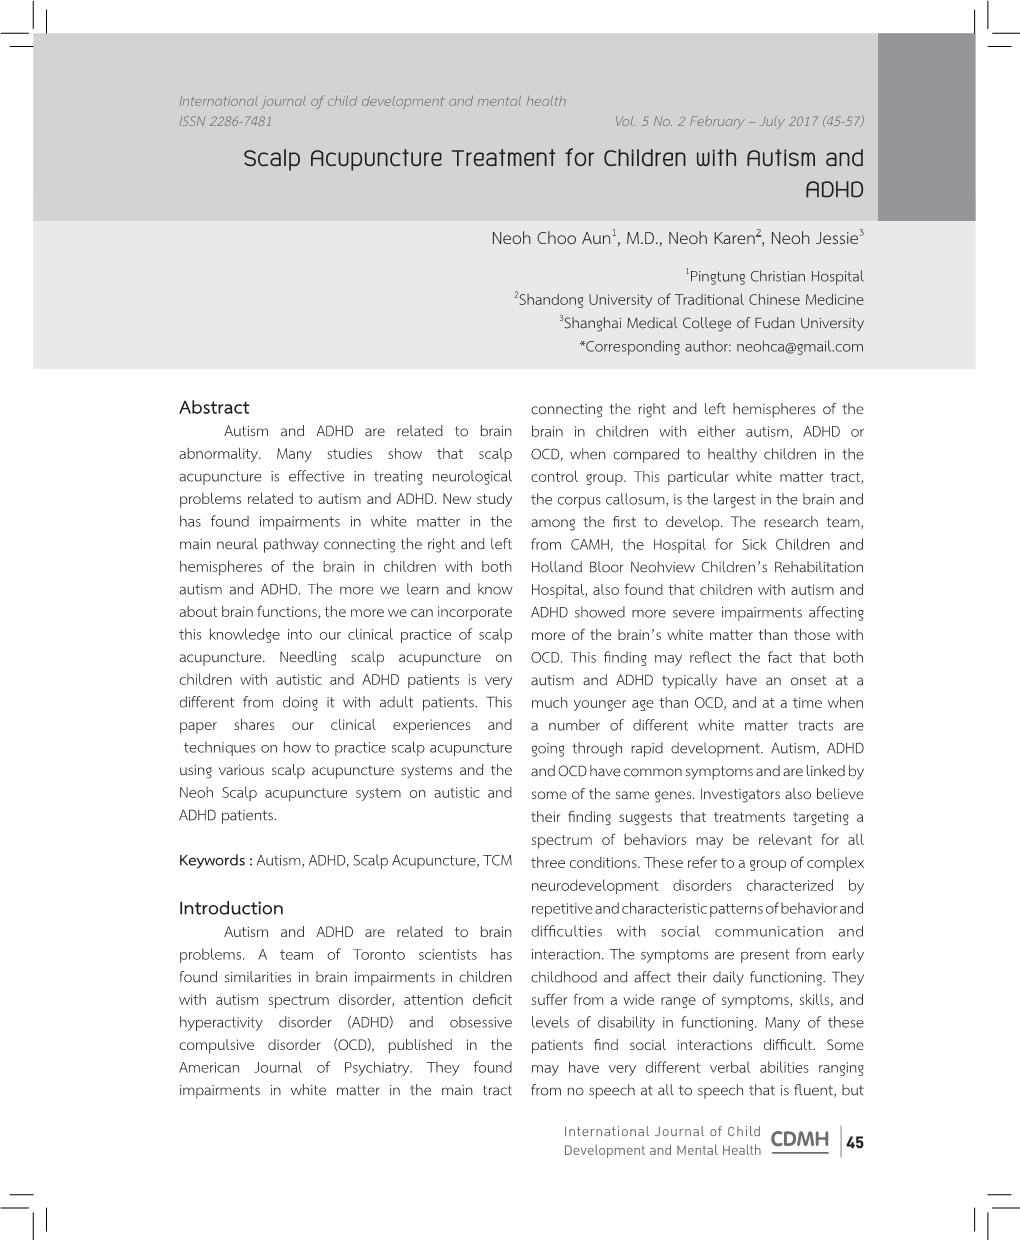 Scalp Acupuncture Treatment for Children with Autism and ADHD